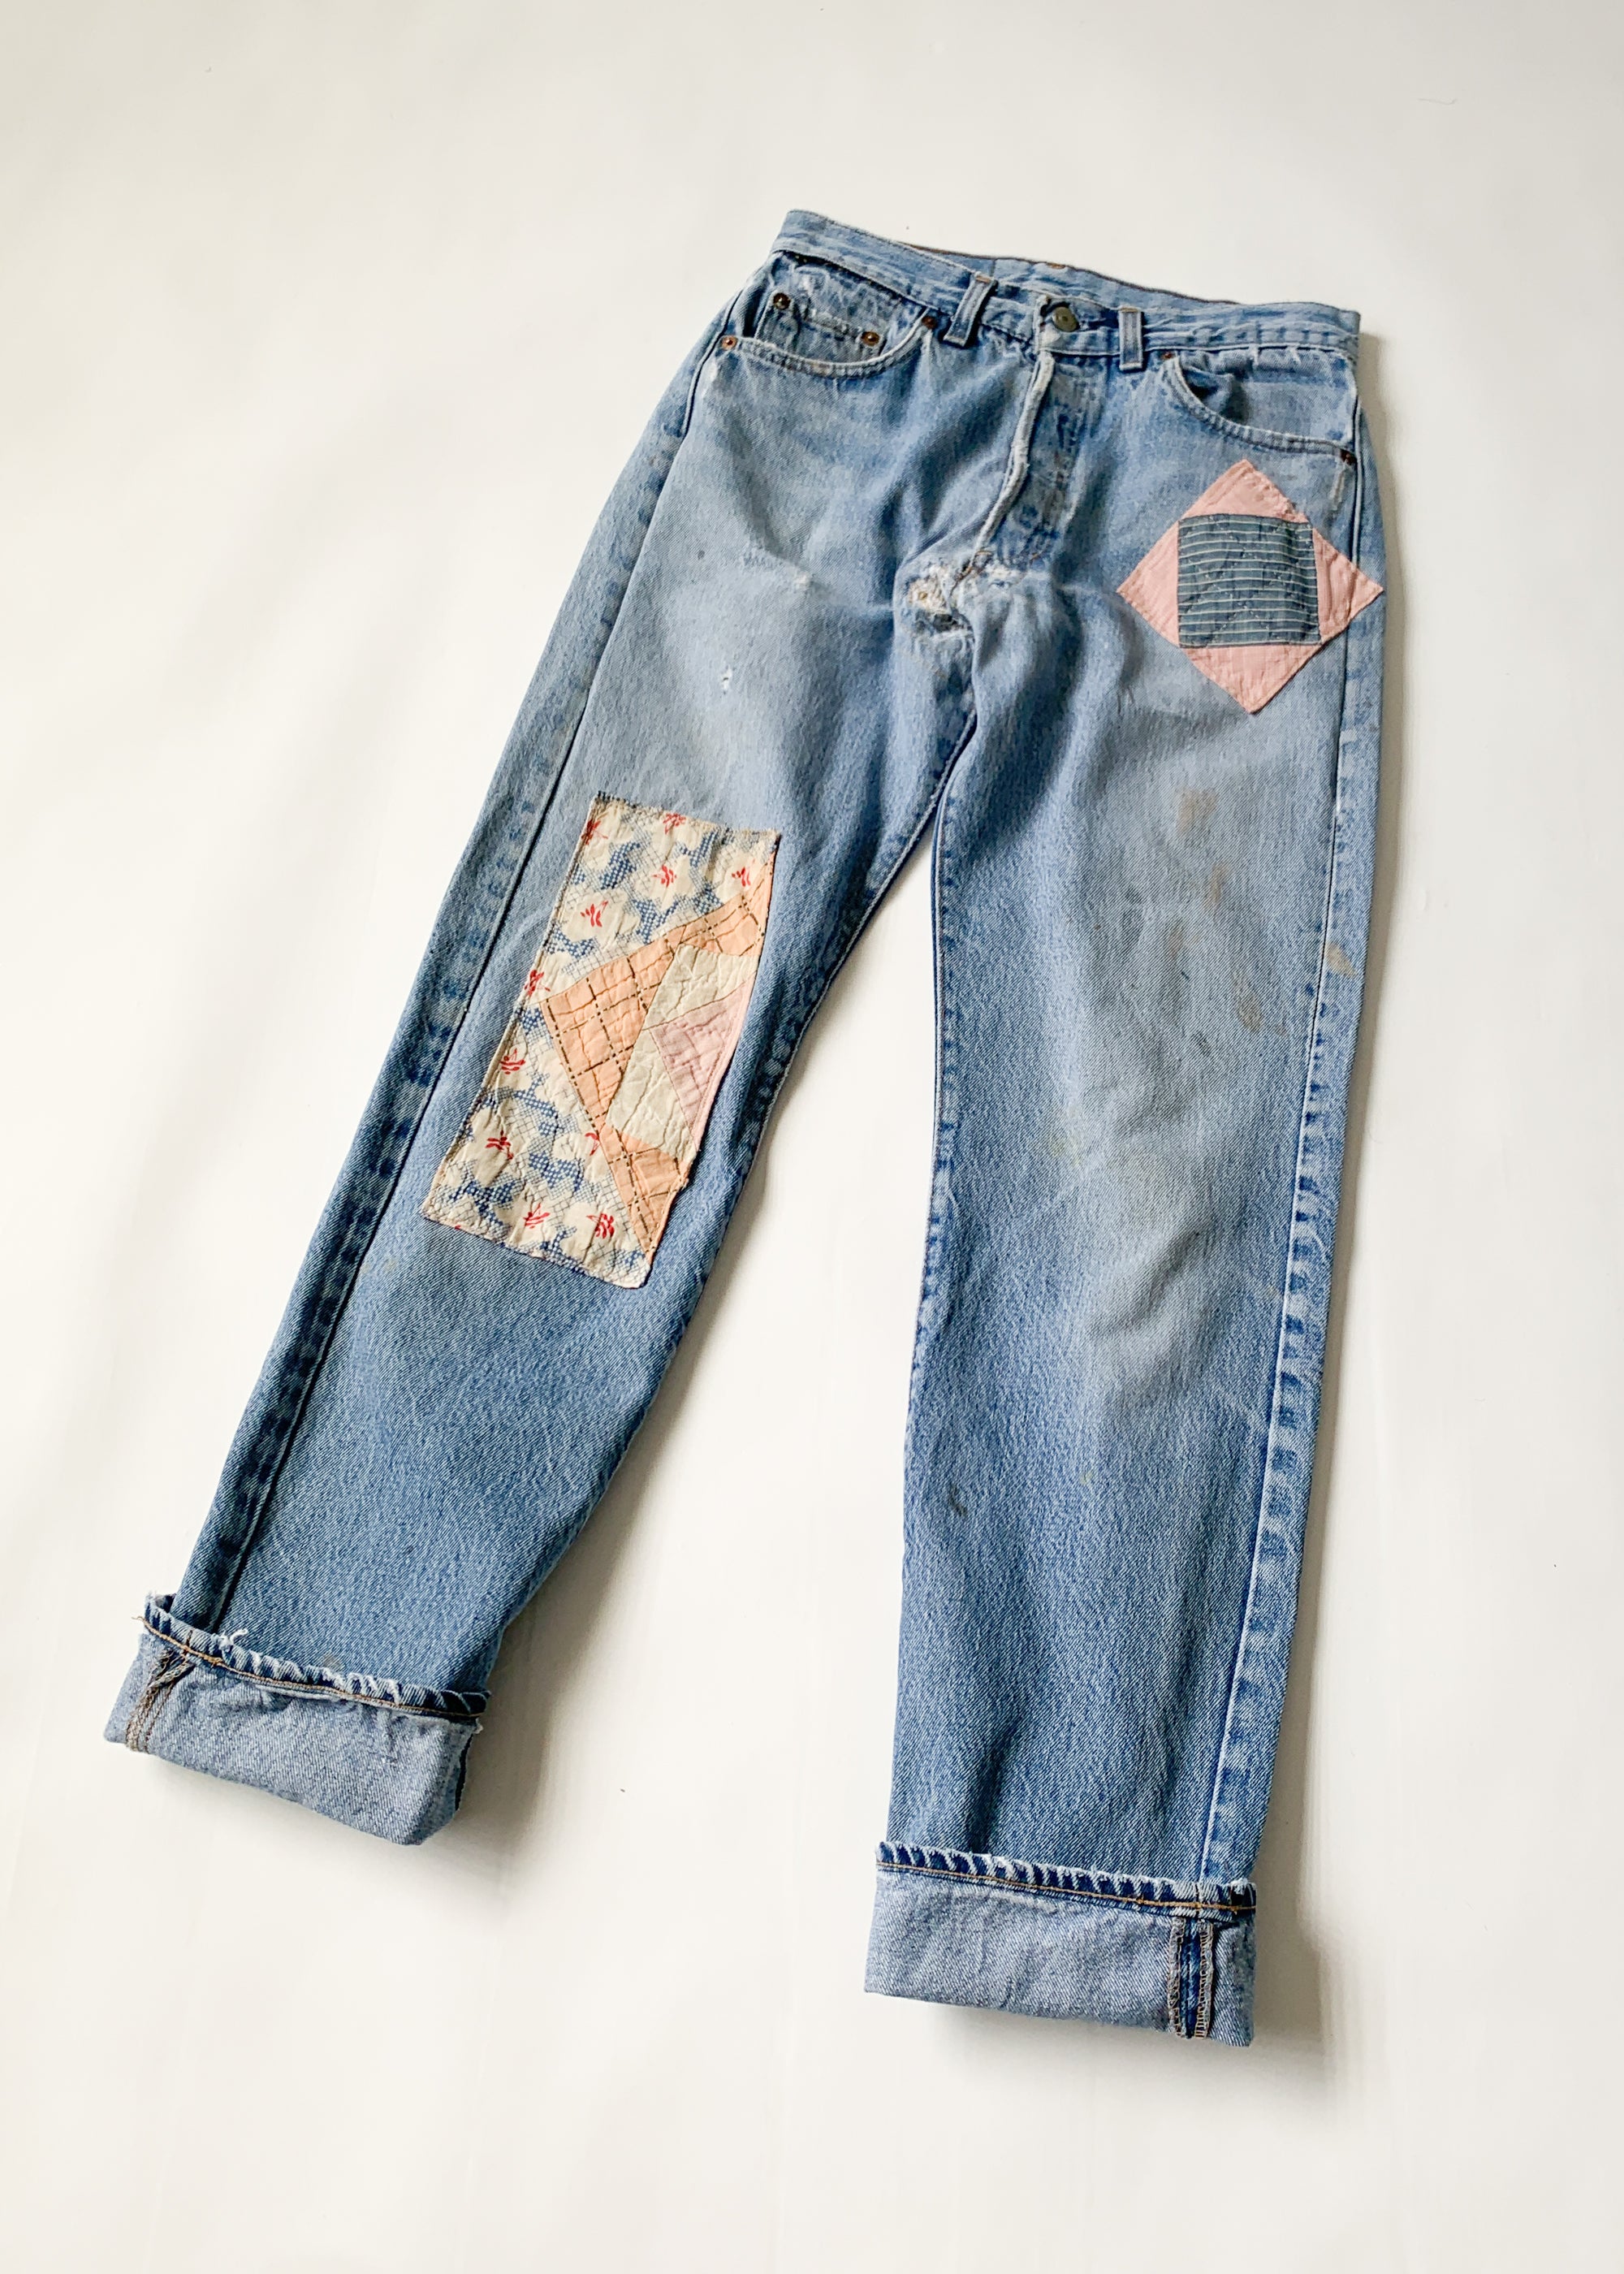 Vintage 1980s Levi's 501 Patched Jeans - Raleigh Vintage